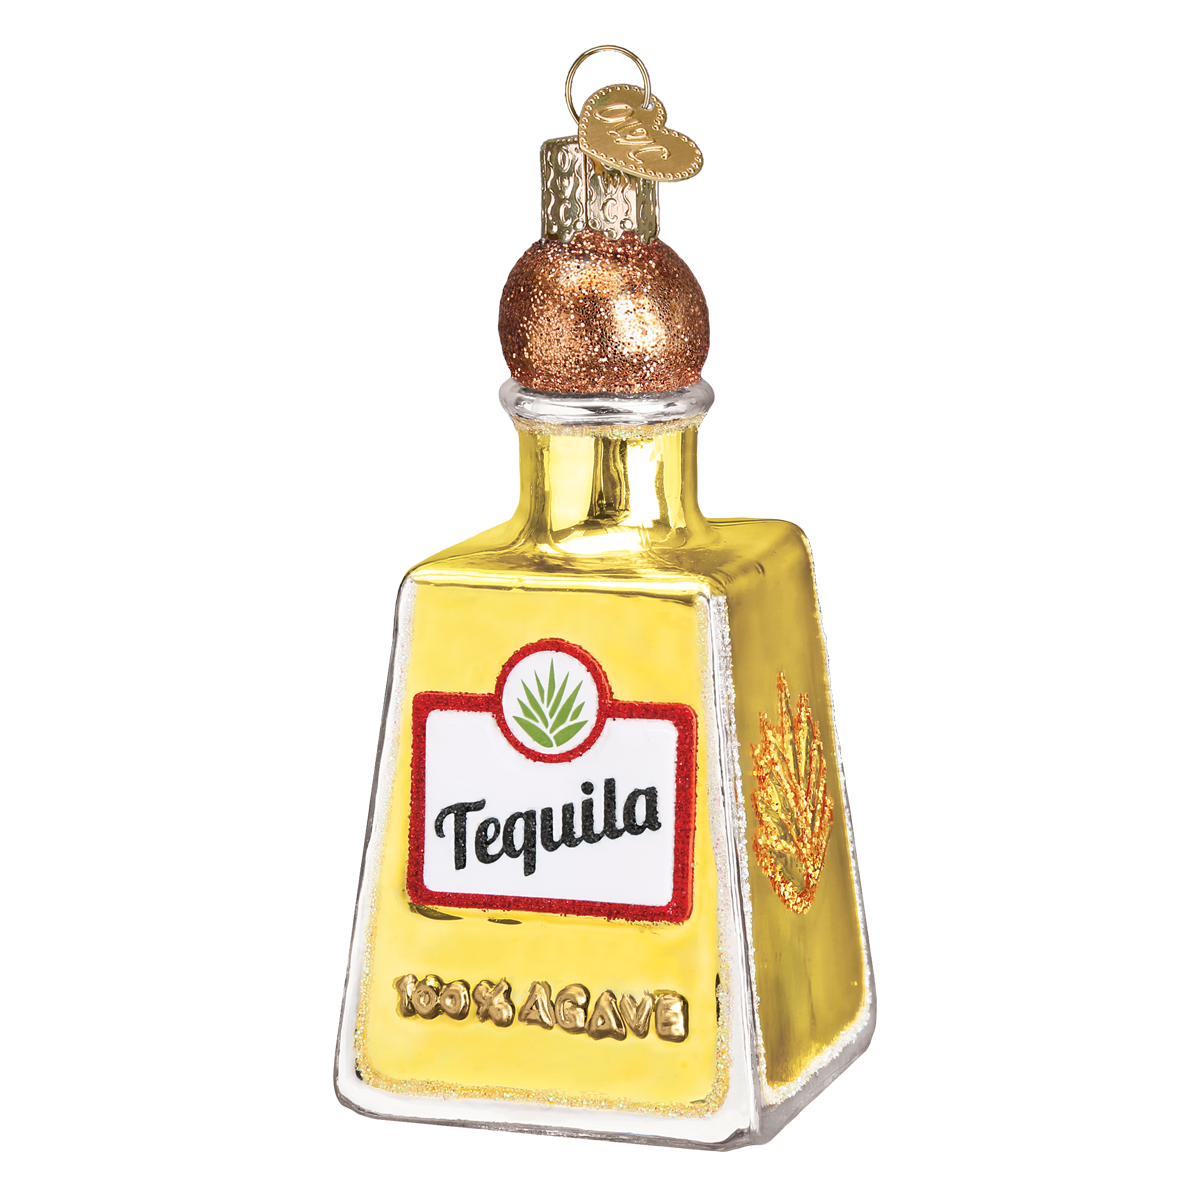 Old World Christmas - Tequila Bottle Ornament    